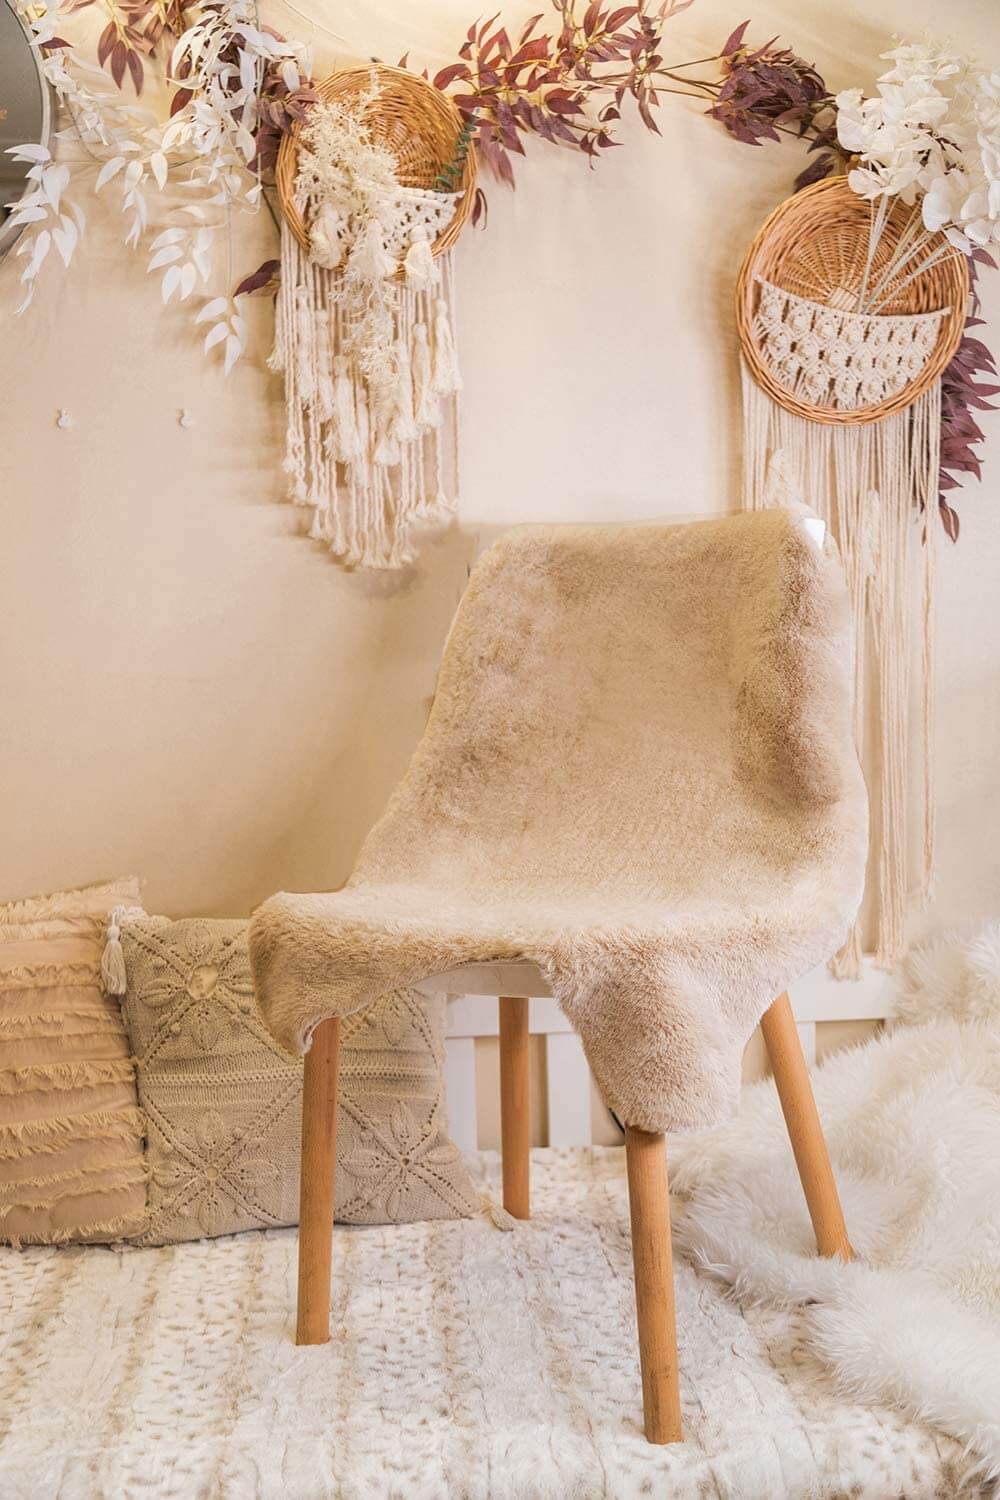 Faux fur area rug | Chair Couch Cover